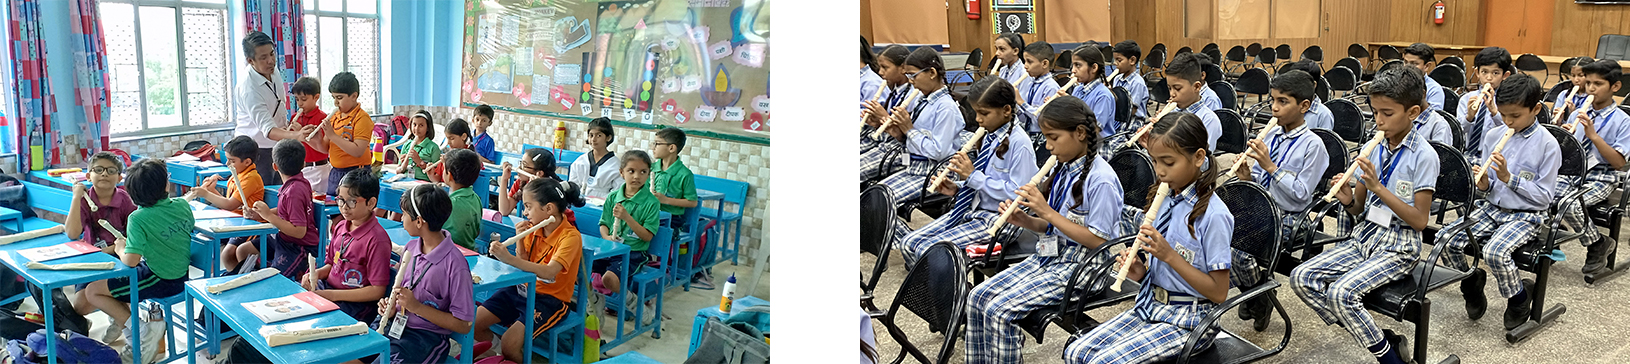 Recorder class in India